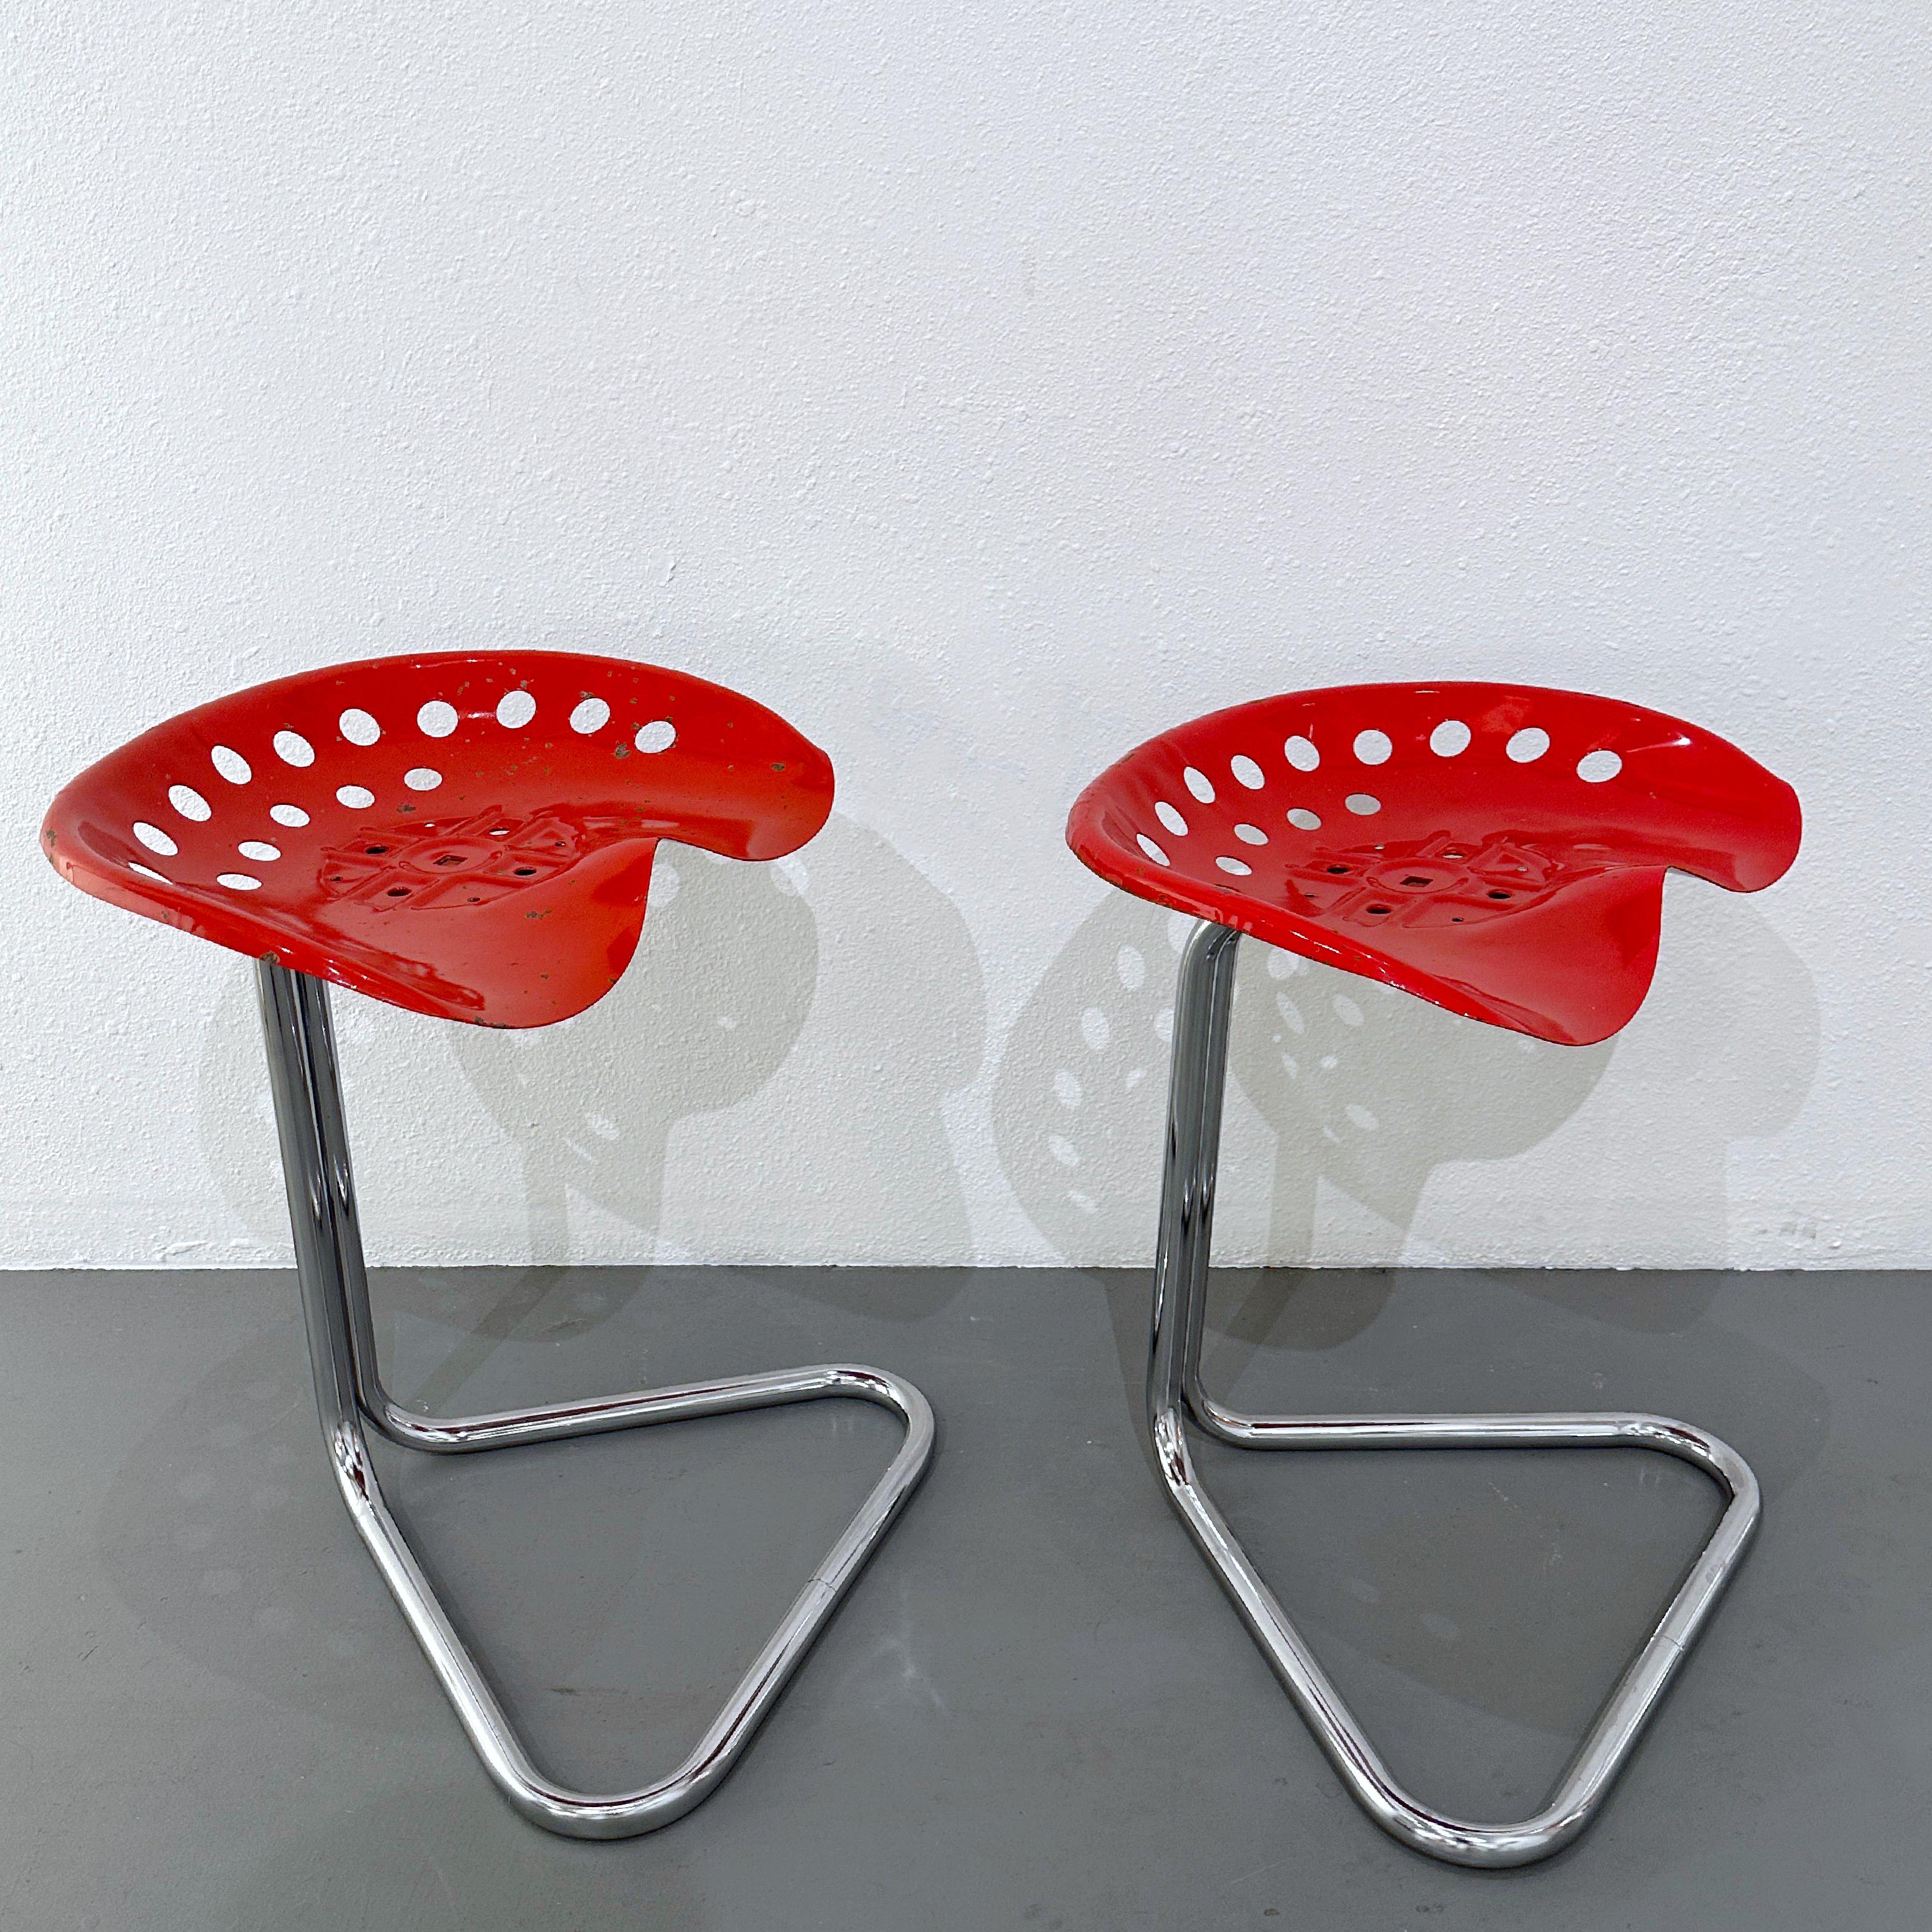 A pair of fabulous T7 Tractor seat stools designed by Rodney Kinsman, a British designer, for his company OMK in 1971. Truly an avant-garde design in a highly desirable red color. These stools feature a seat made from an actual tractor seat mold,